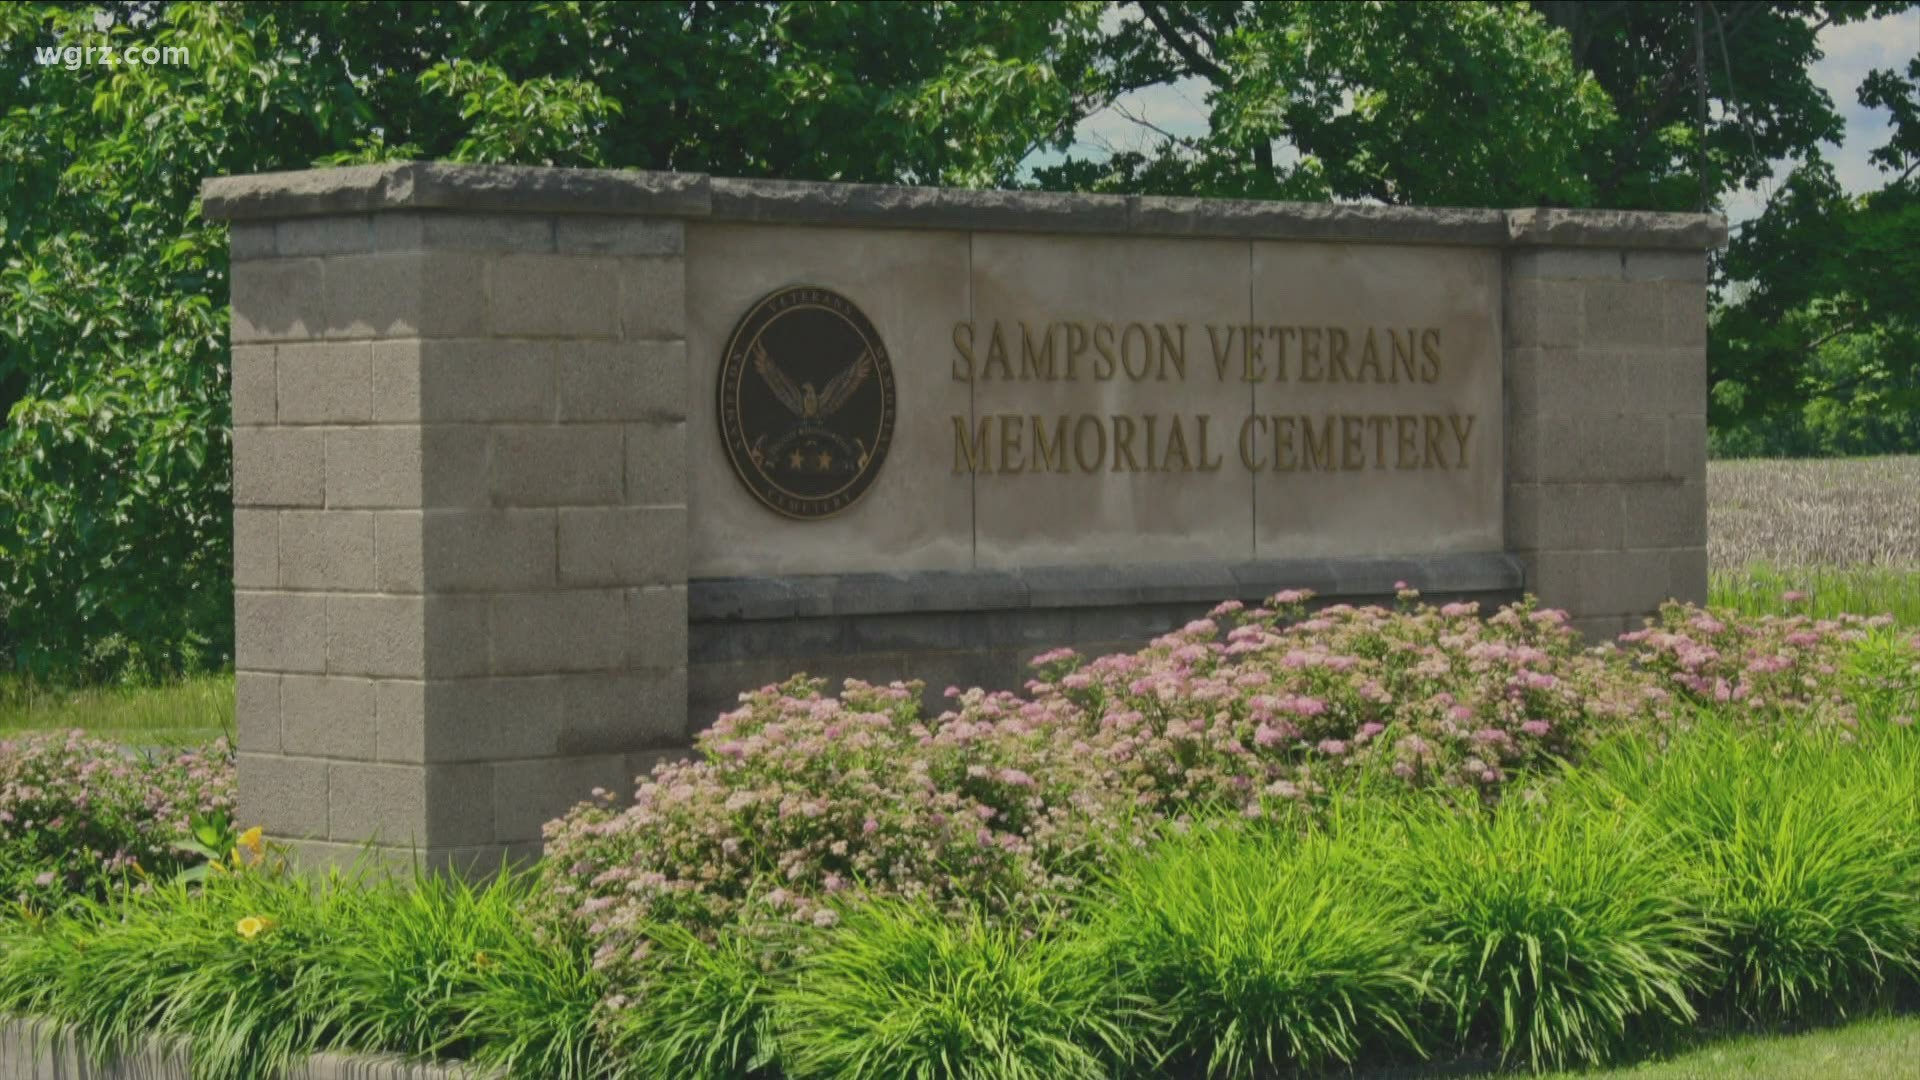 A state appointed committee has chosen Sampson Veterans Memorial Cemetery..